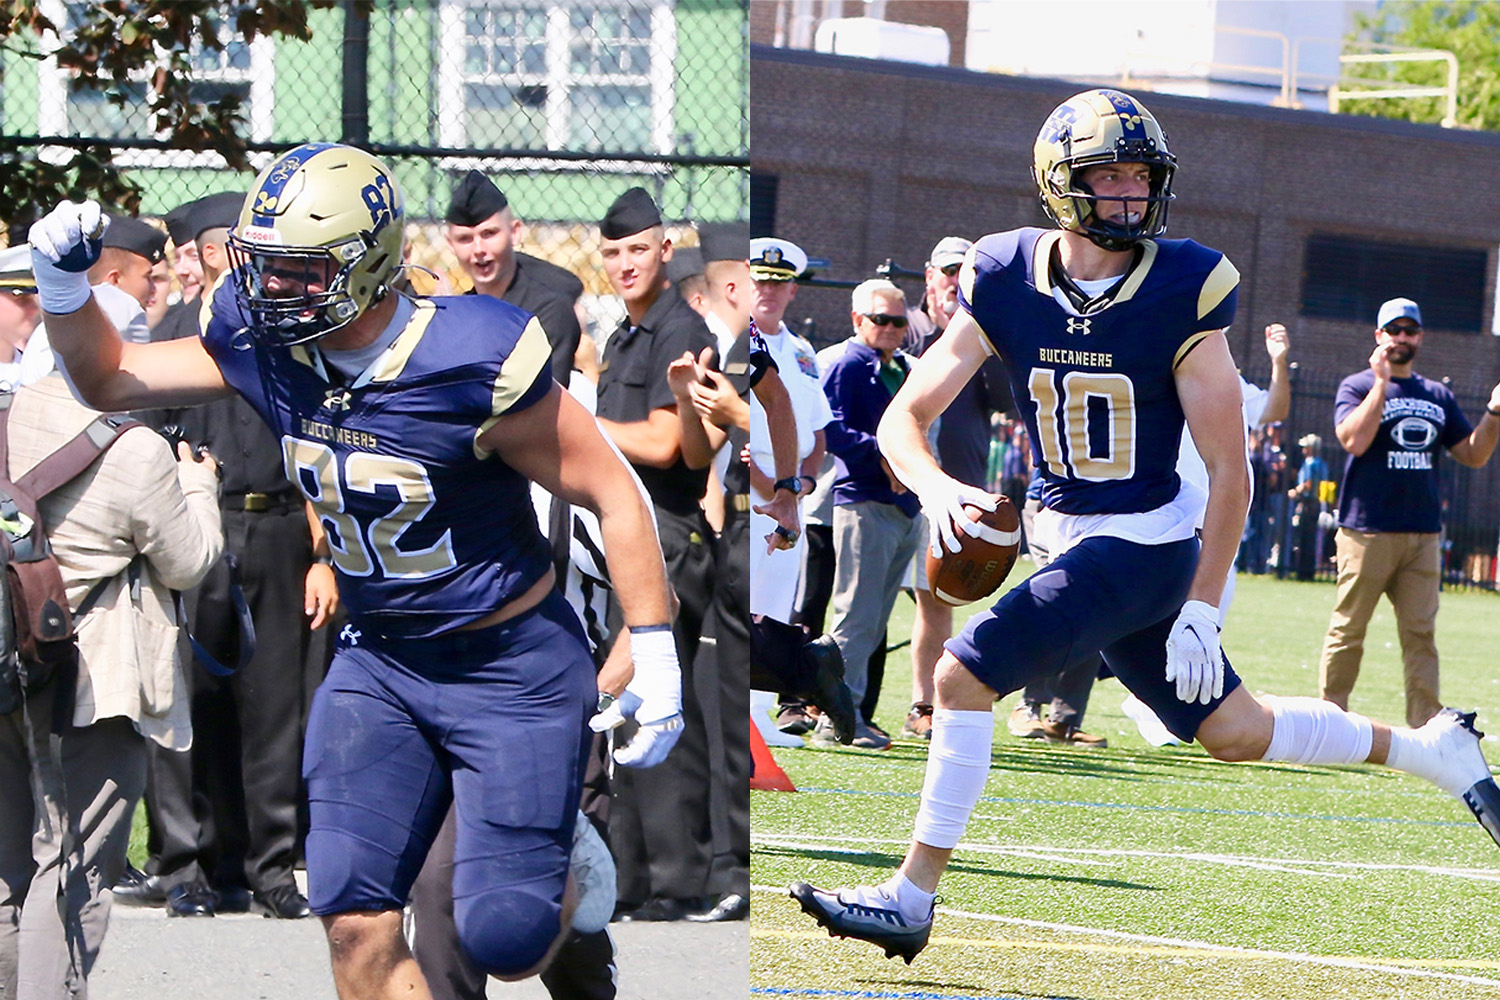 Brightman and Wells Named to D3Football.com Team of the Week